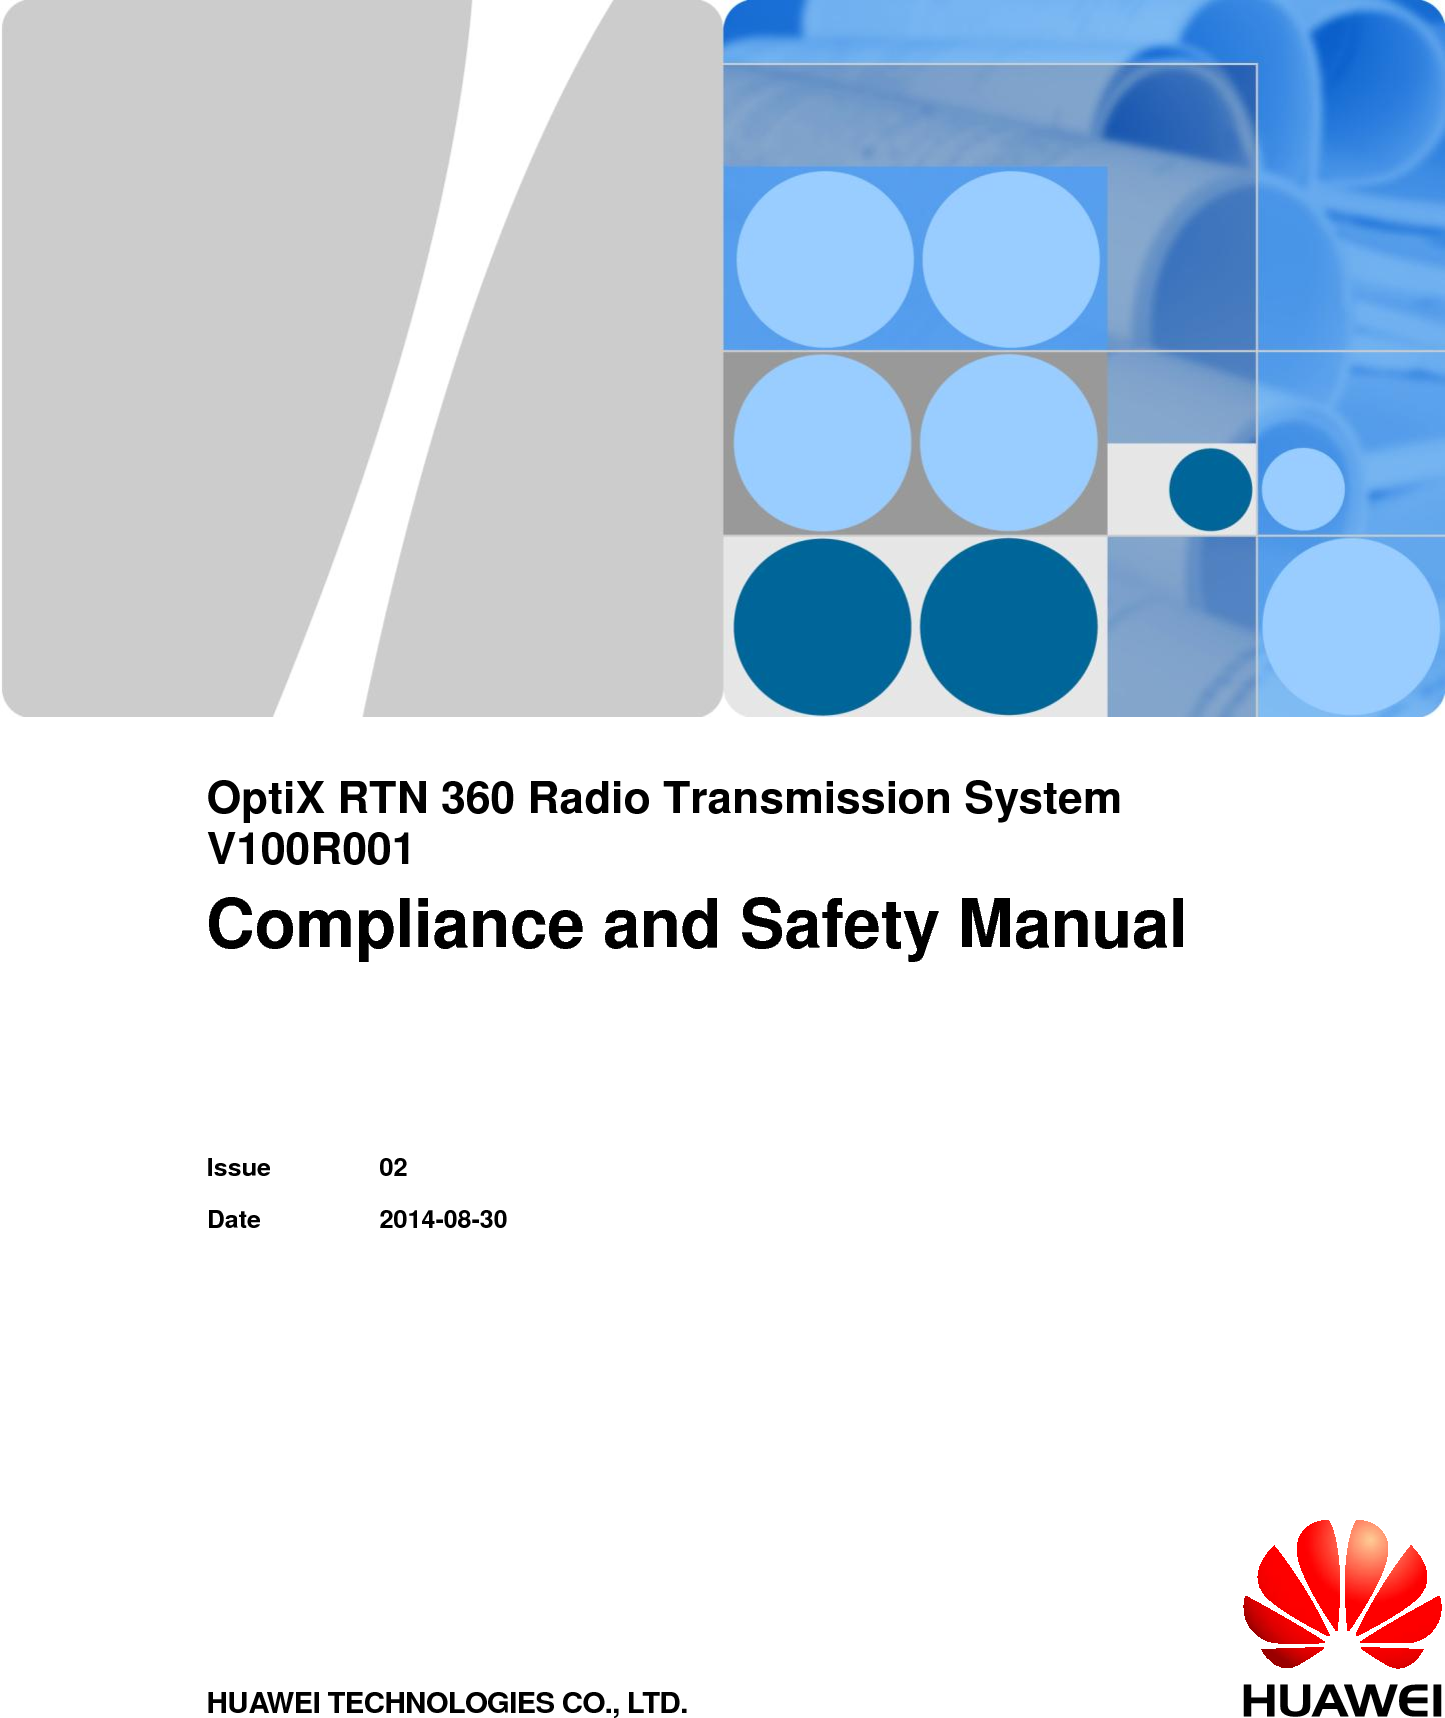        OptiX RTN 360 Radio Transmission System V100R001 Compliance and Safety Manual   Issue 02 Date 2014-08-30 HUAWEI TECHNOLOGIES CO., LTD. 